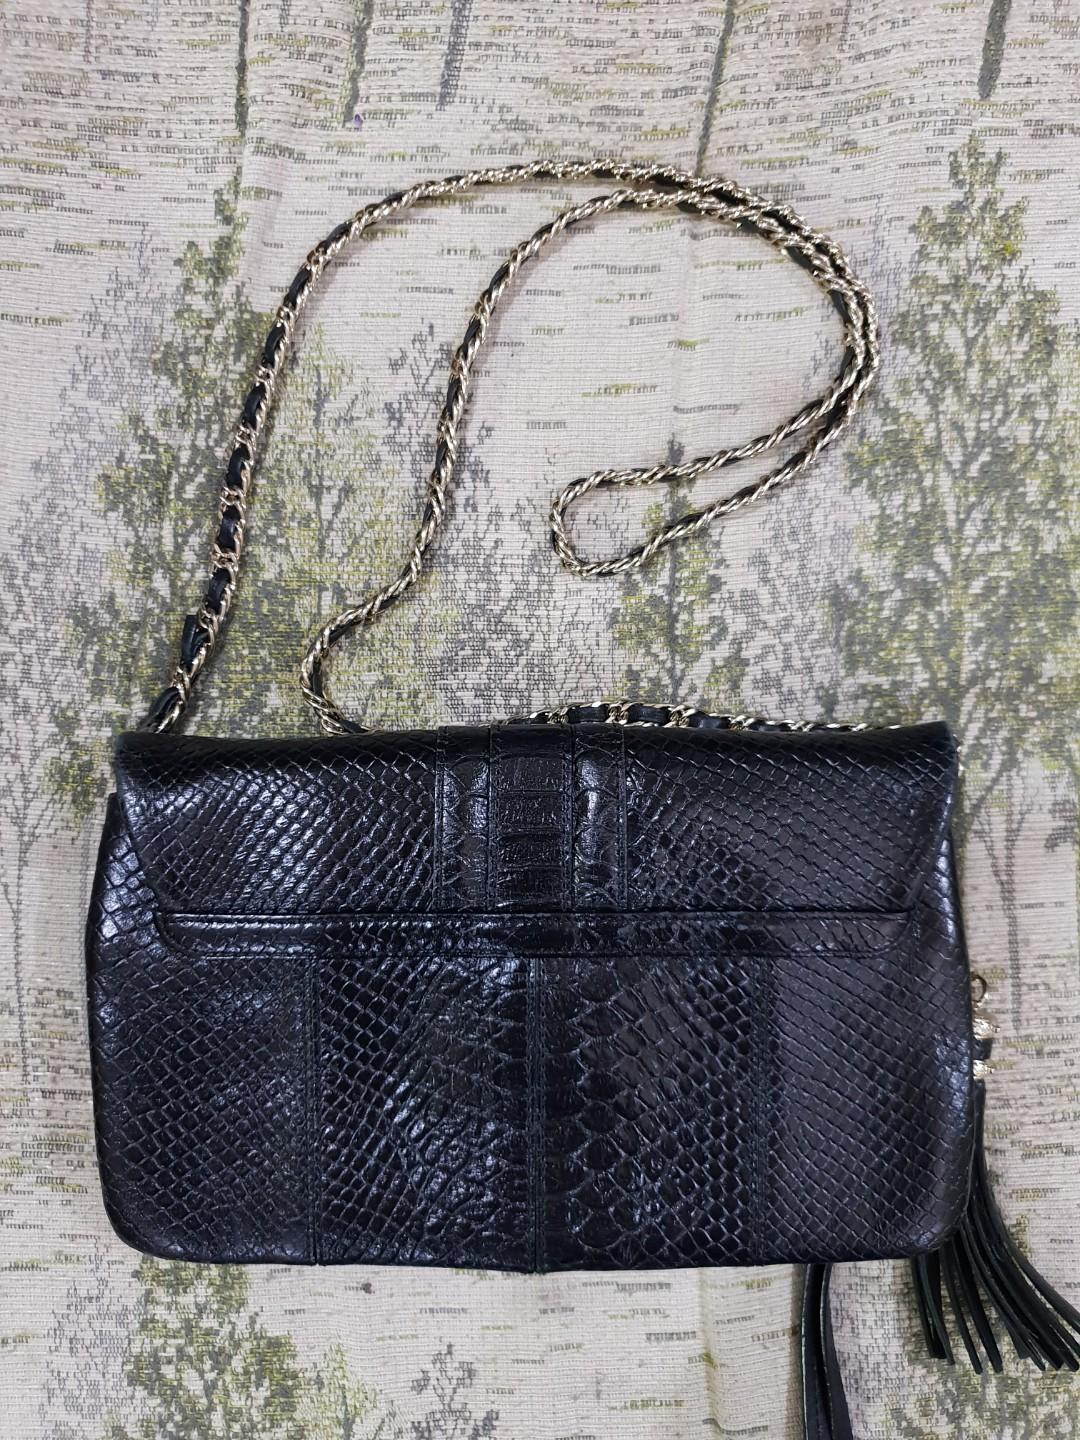 Authentic Metro city snake skin leather chain bag  Snake skin bag, Leather  crossbody bag, Leather crossbody purse